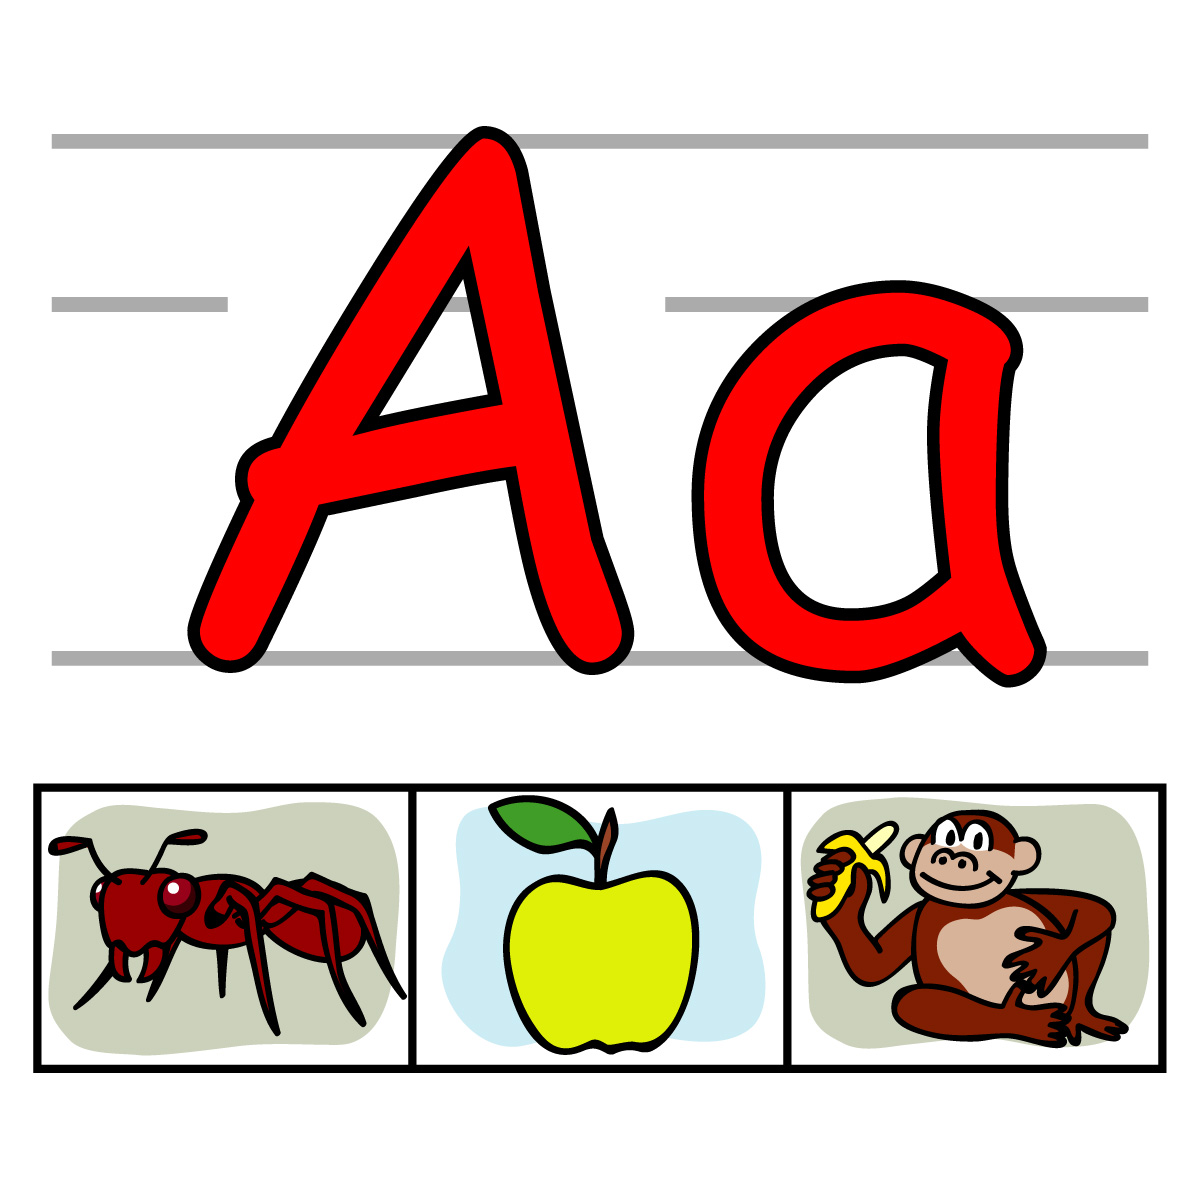 Alphabet Clipart to Download - dbclipart.com